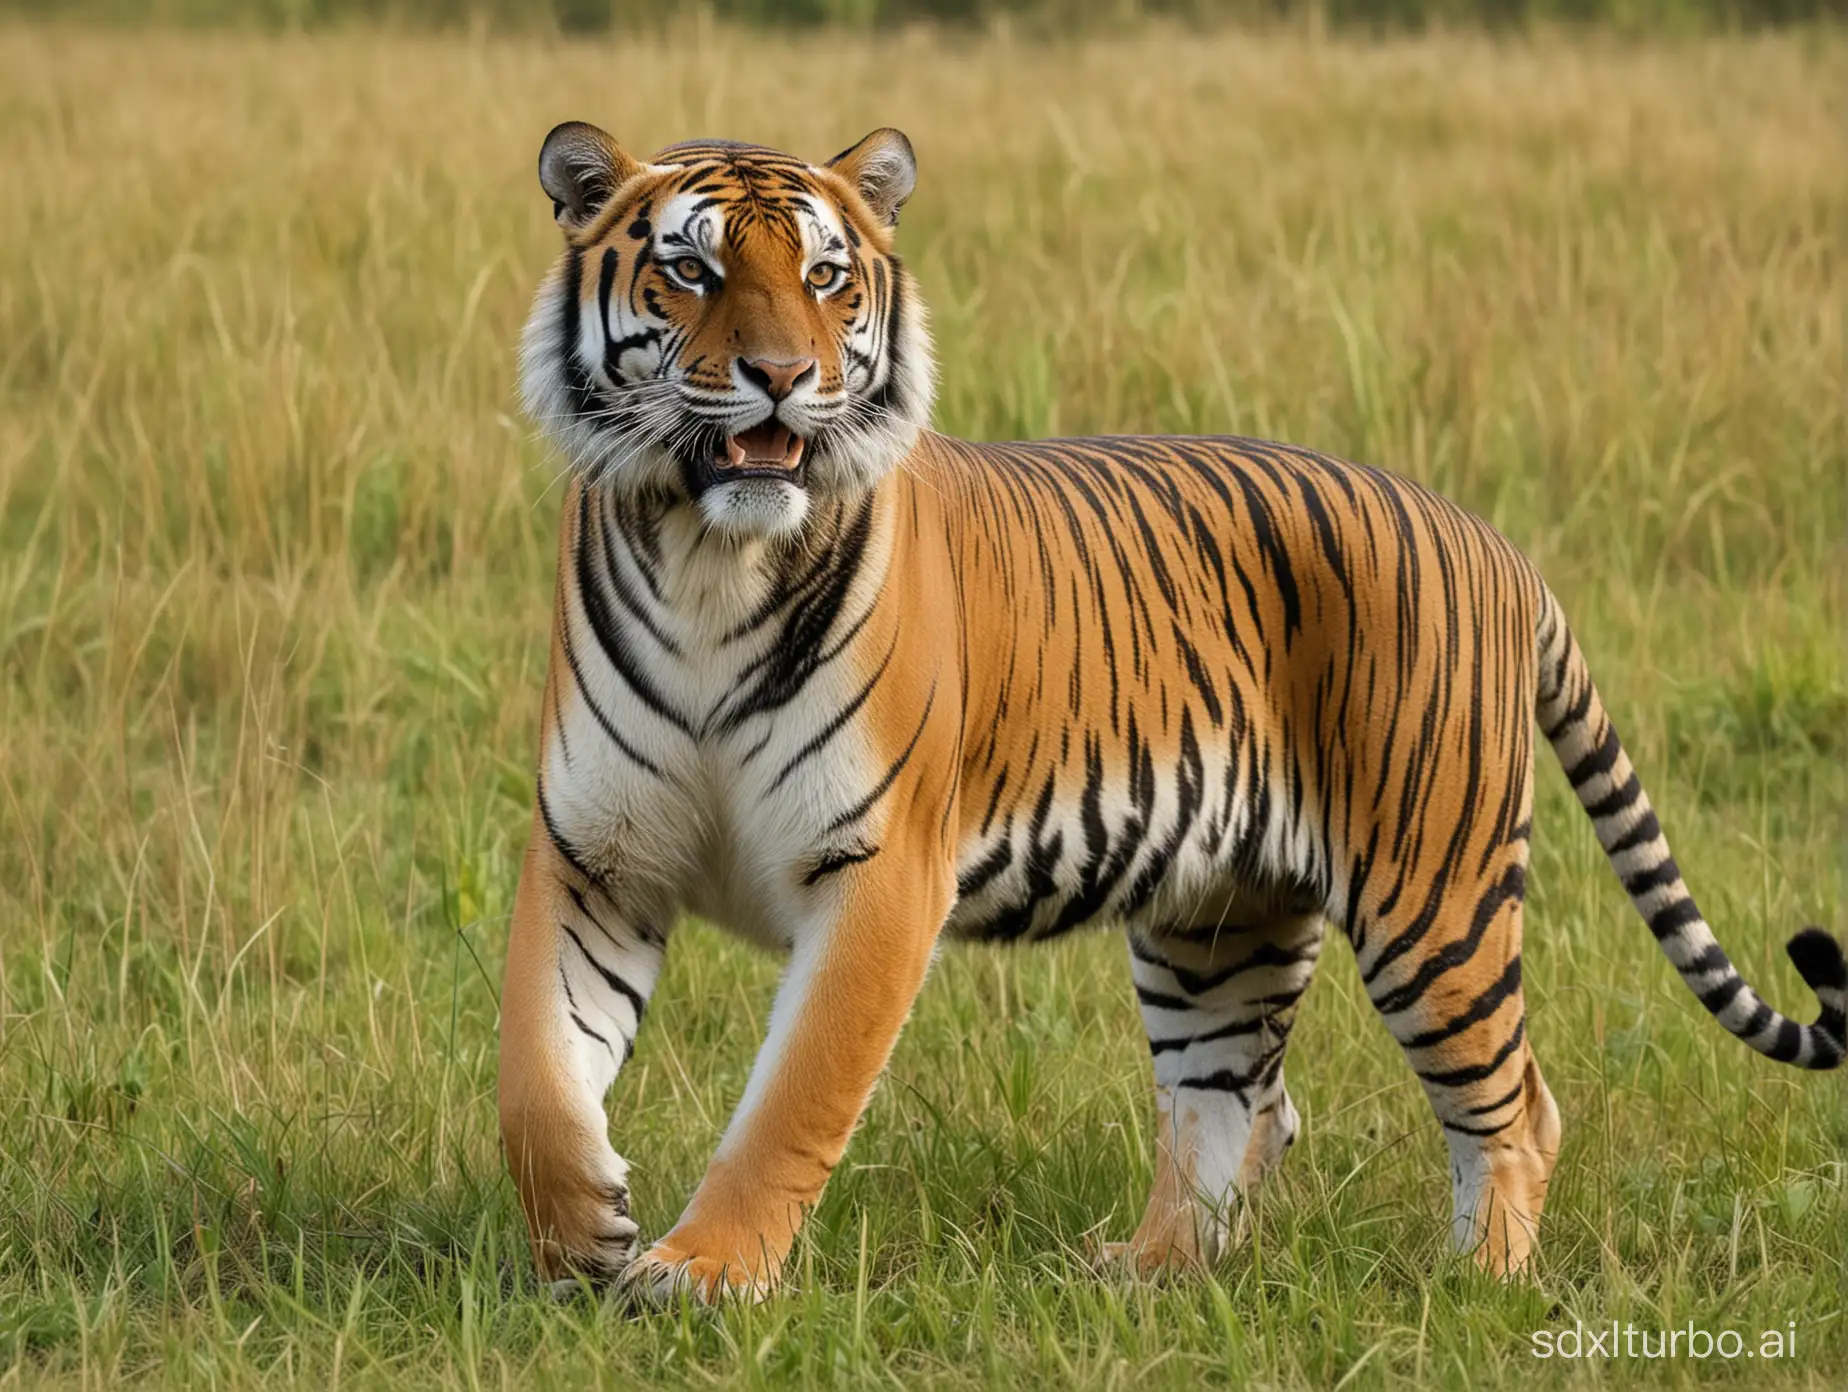 The Roaring Royal Bengal Tiger in a grassland,